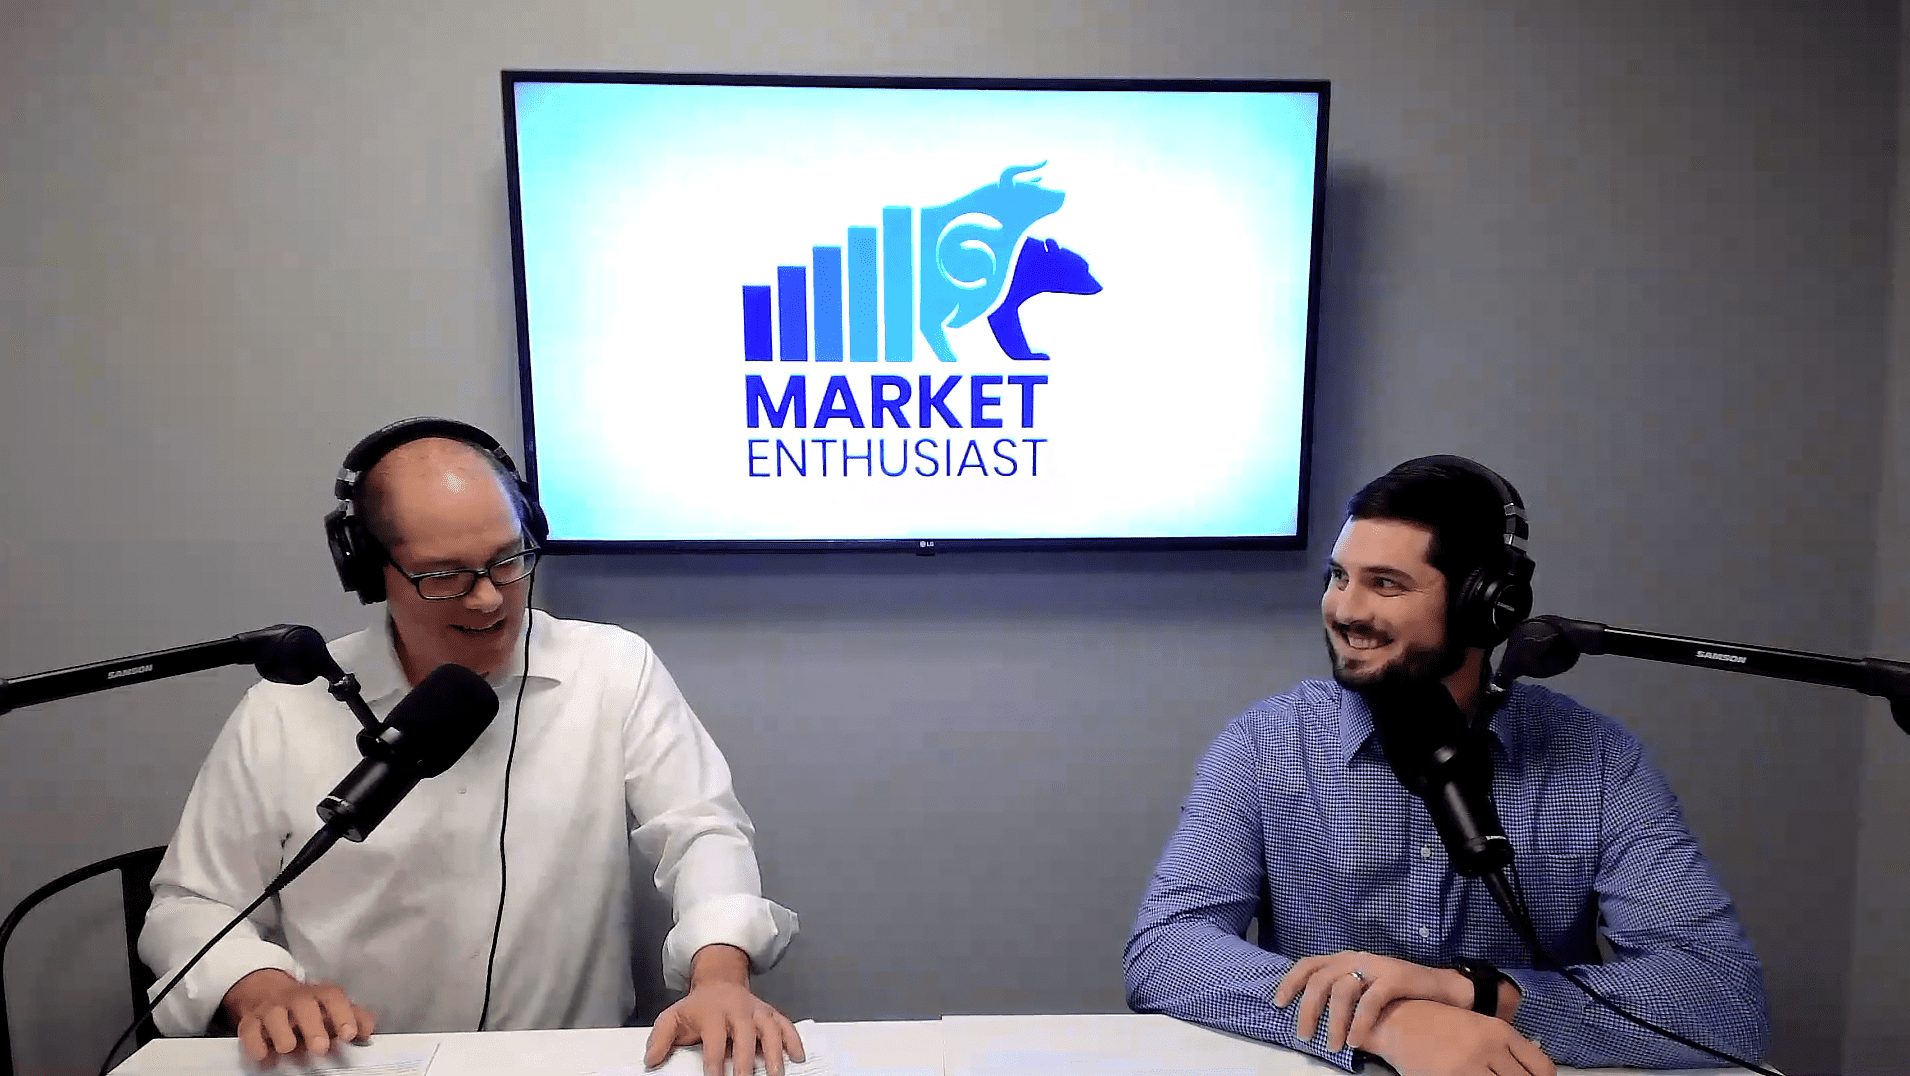 Chris Needs and Noah Brooks talk all things market during a recording of their podcast